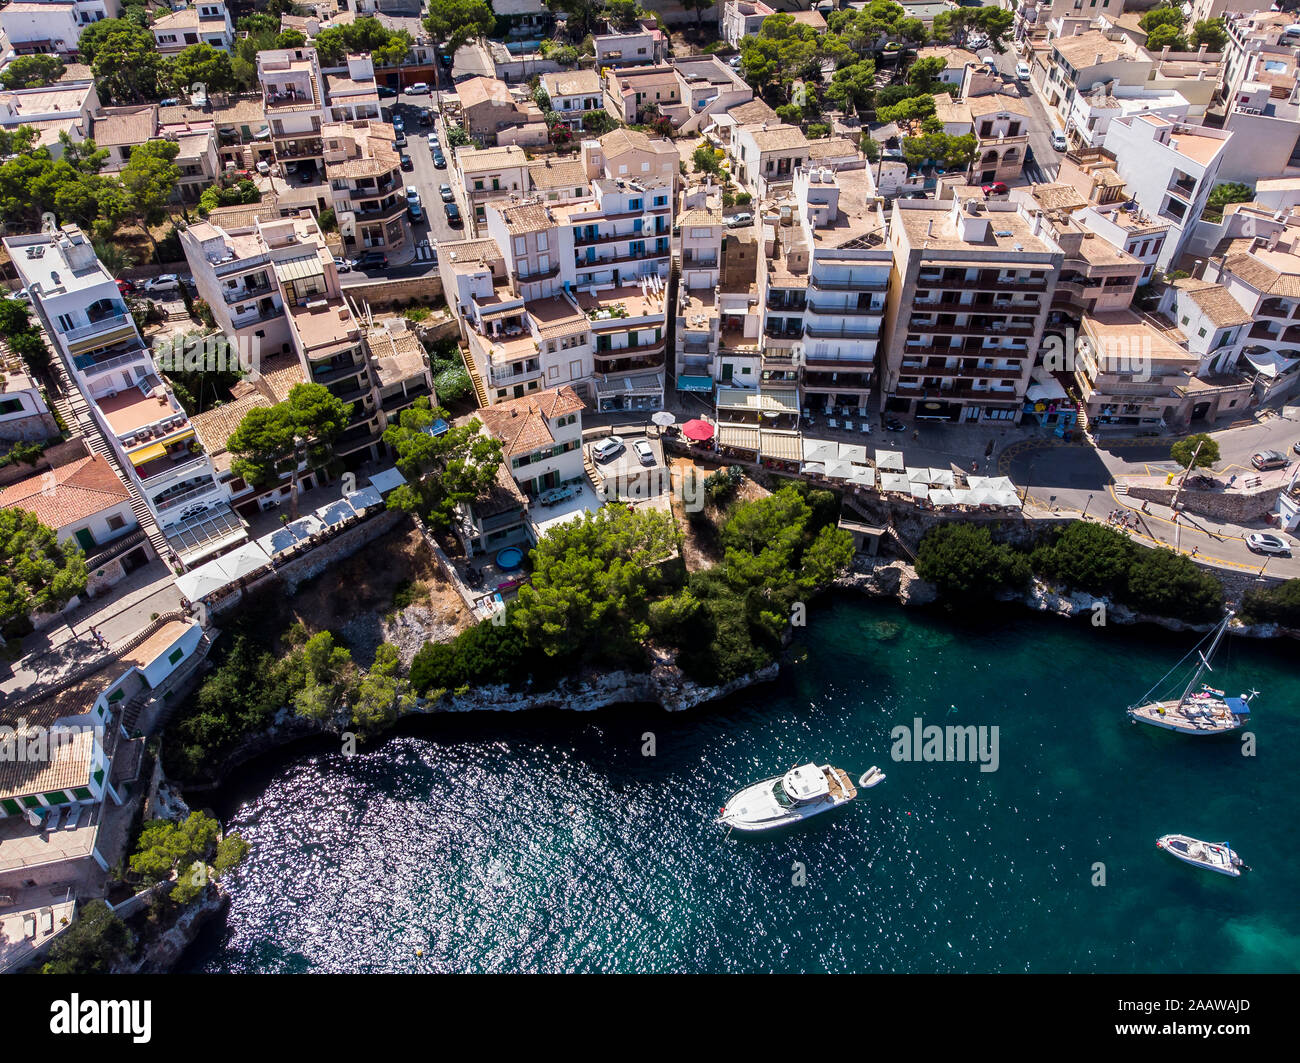 Spain, Balearic Islands, Mallorca, Aerial view of bay Cala Figuera Stock Photo